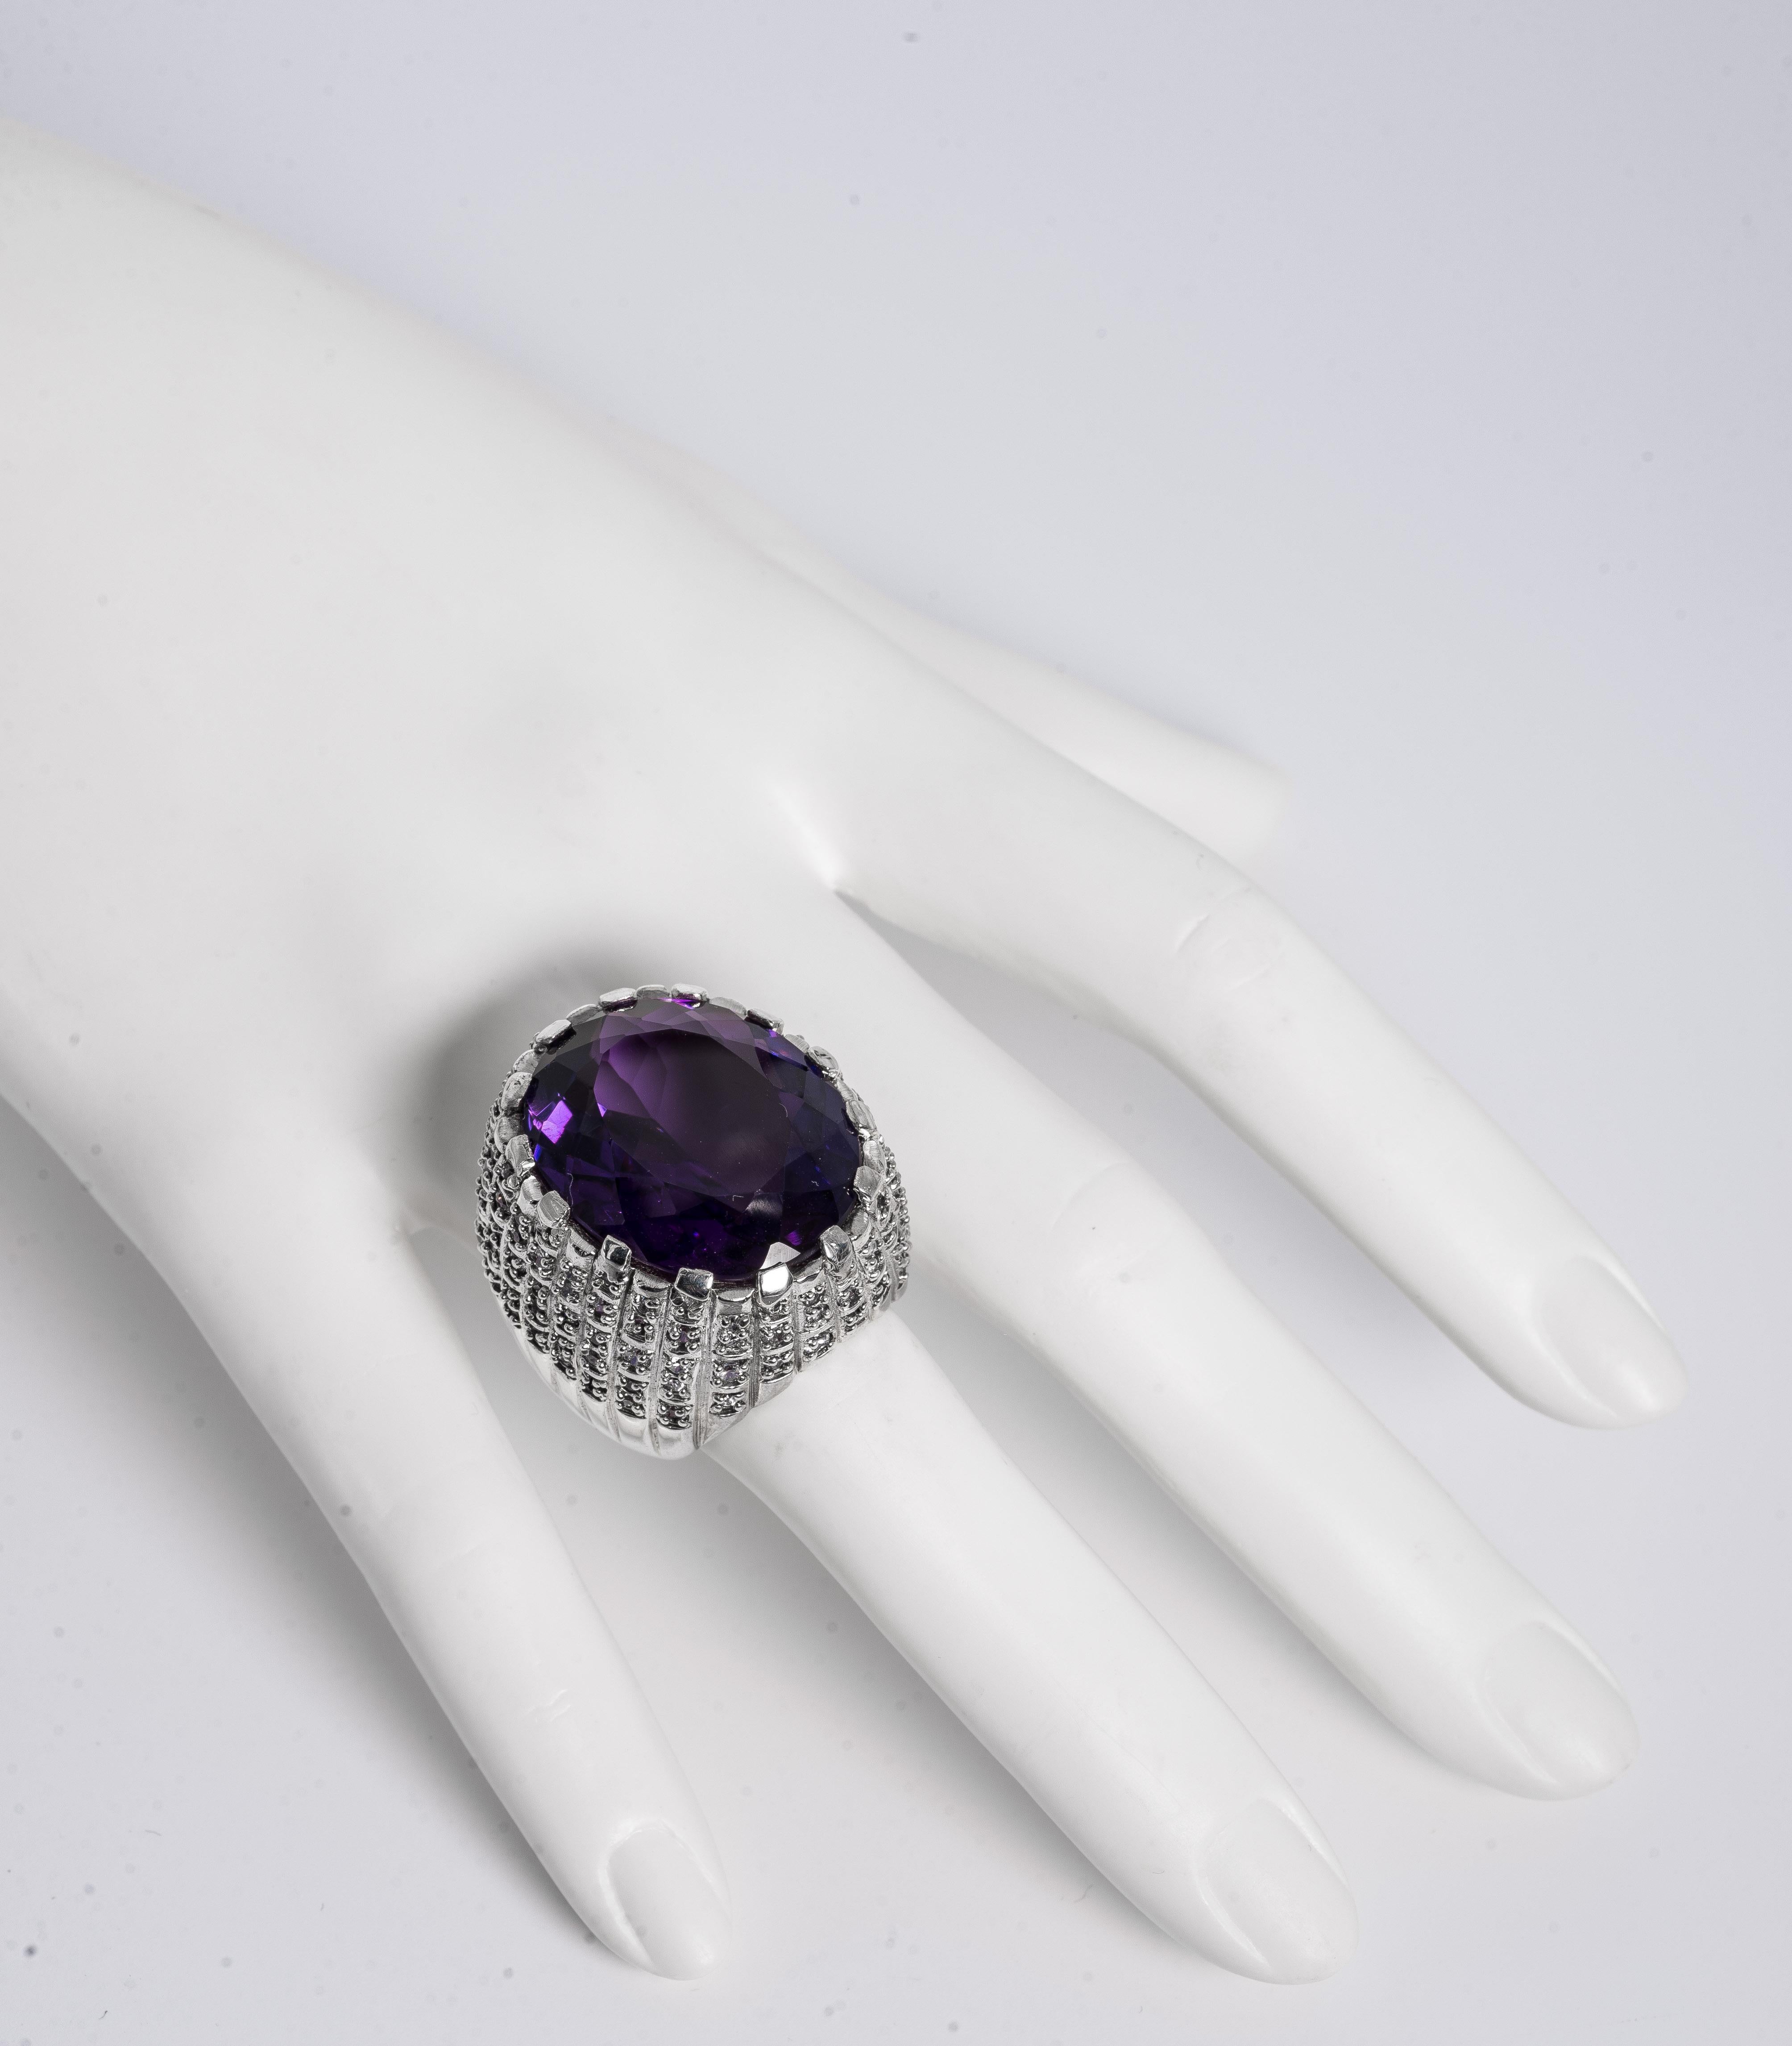 Large Real Amethyst Set In A  CZ Pave Sterling Chunky Ring
This is a big ring statement ring!  measures 1 1/4inch diameter over half an inch off the the finger and free sizing!